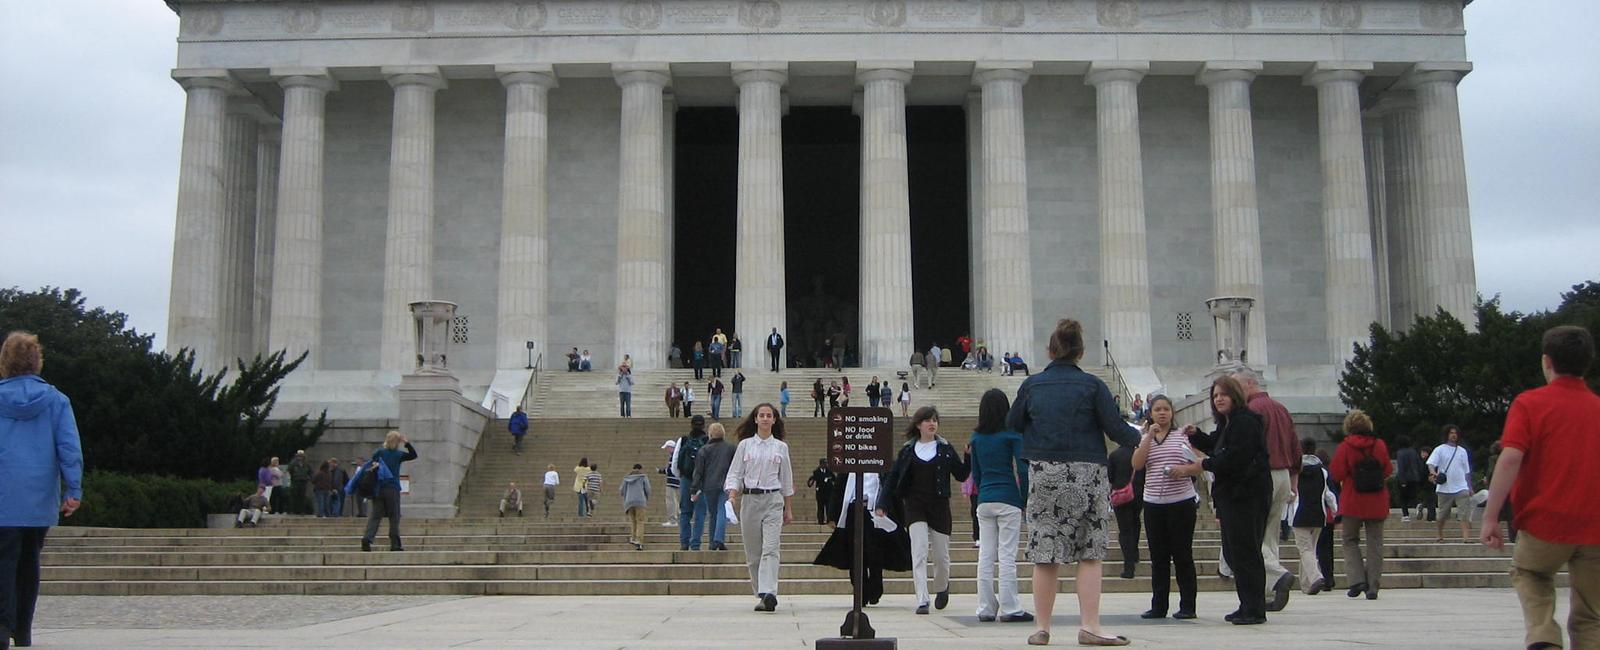 26 states are listed across the top of the lincoln memorial on the back of the 5 bill